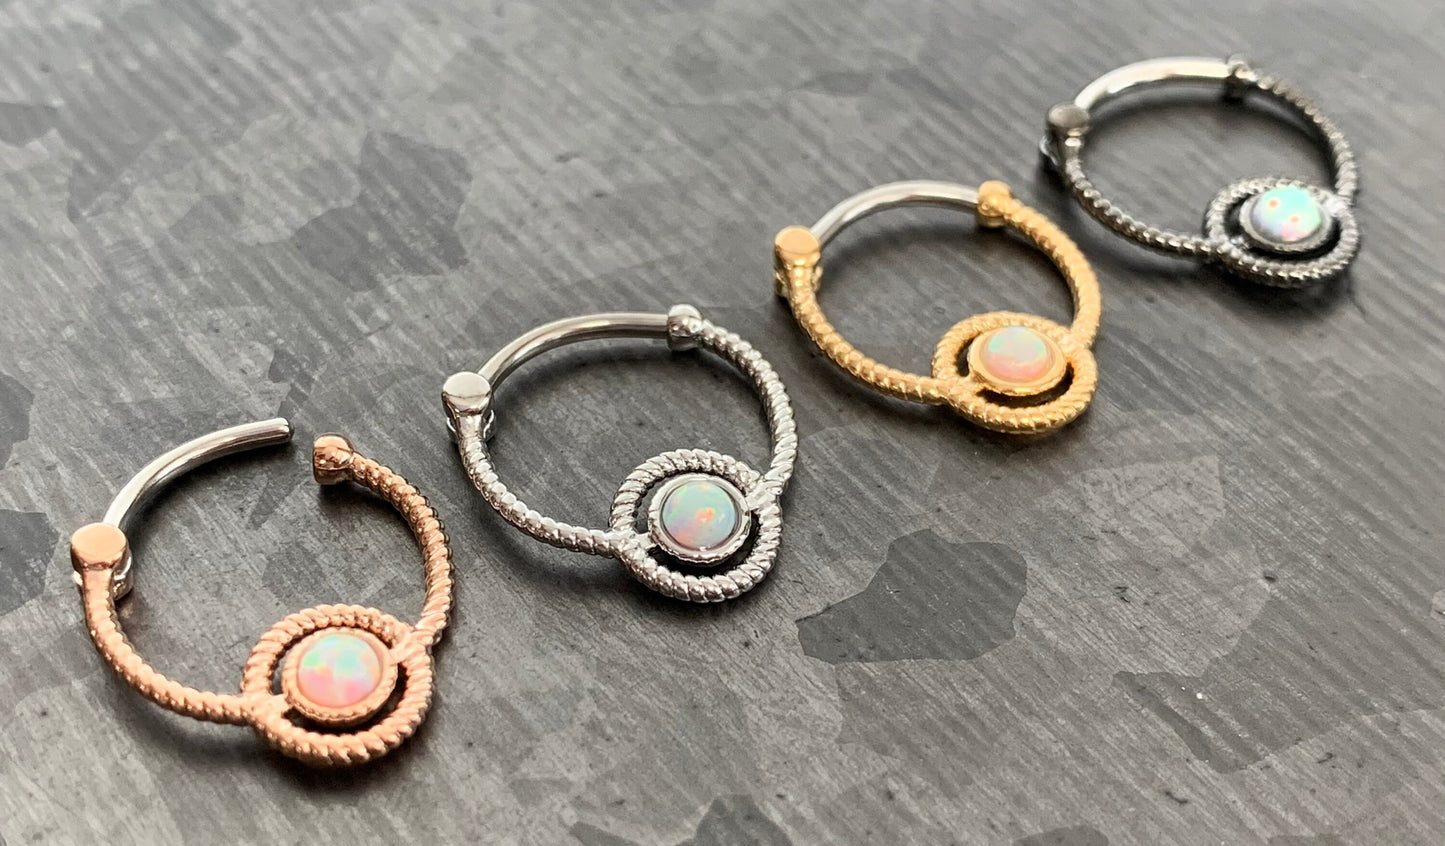 1 Piece Opal Roped Circle Design Septum Clicker Ring - 16g - Gold, Rose Gold, Rhodium and Steel!